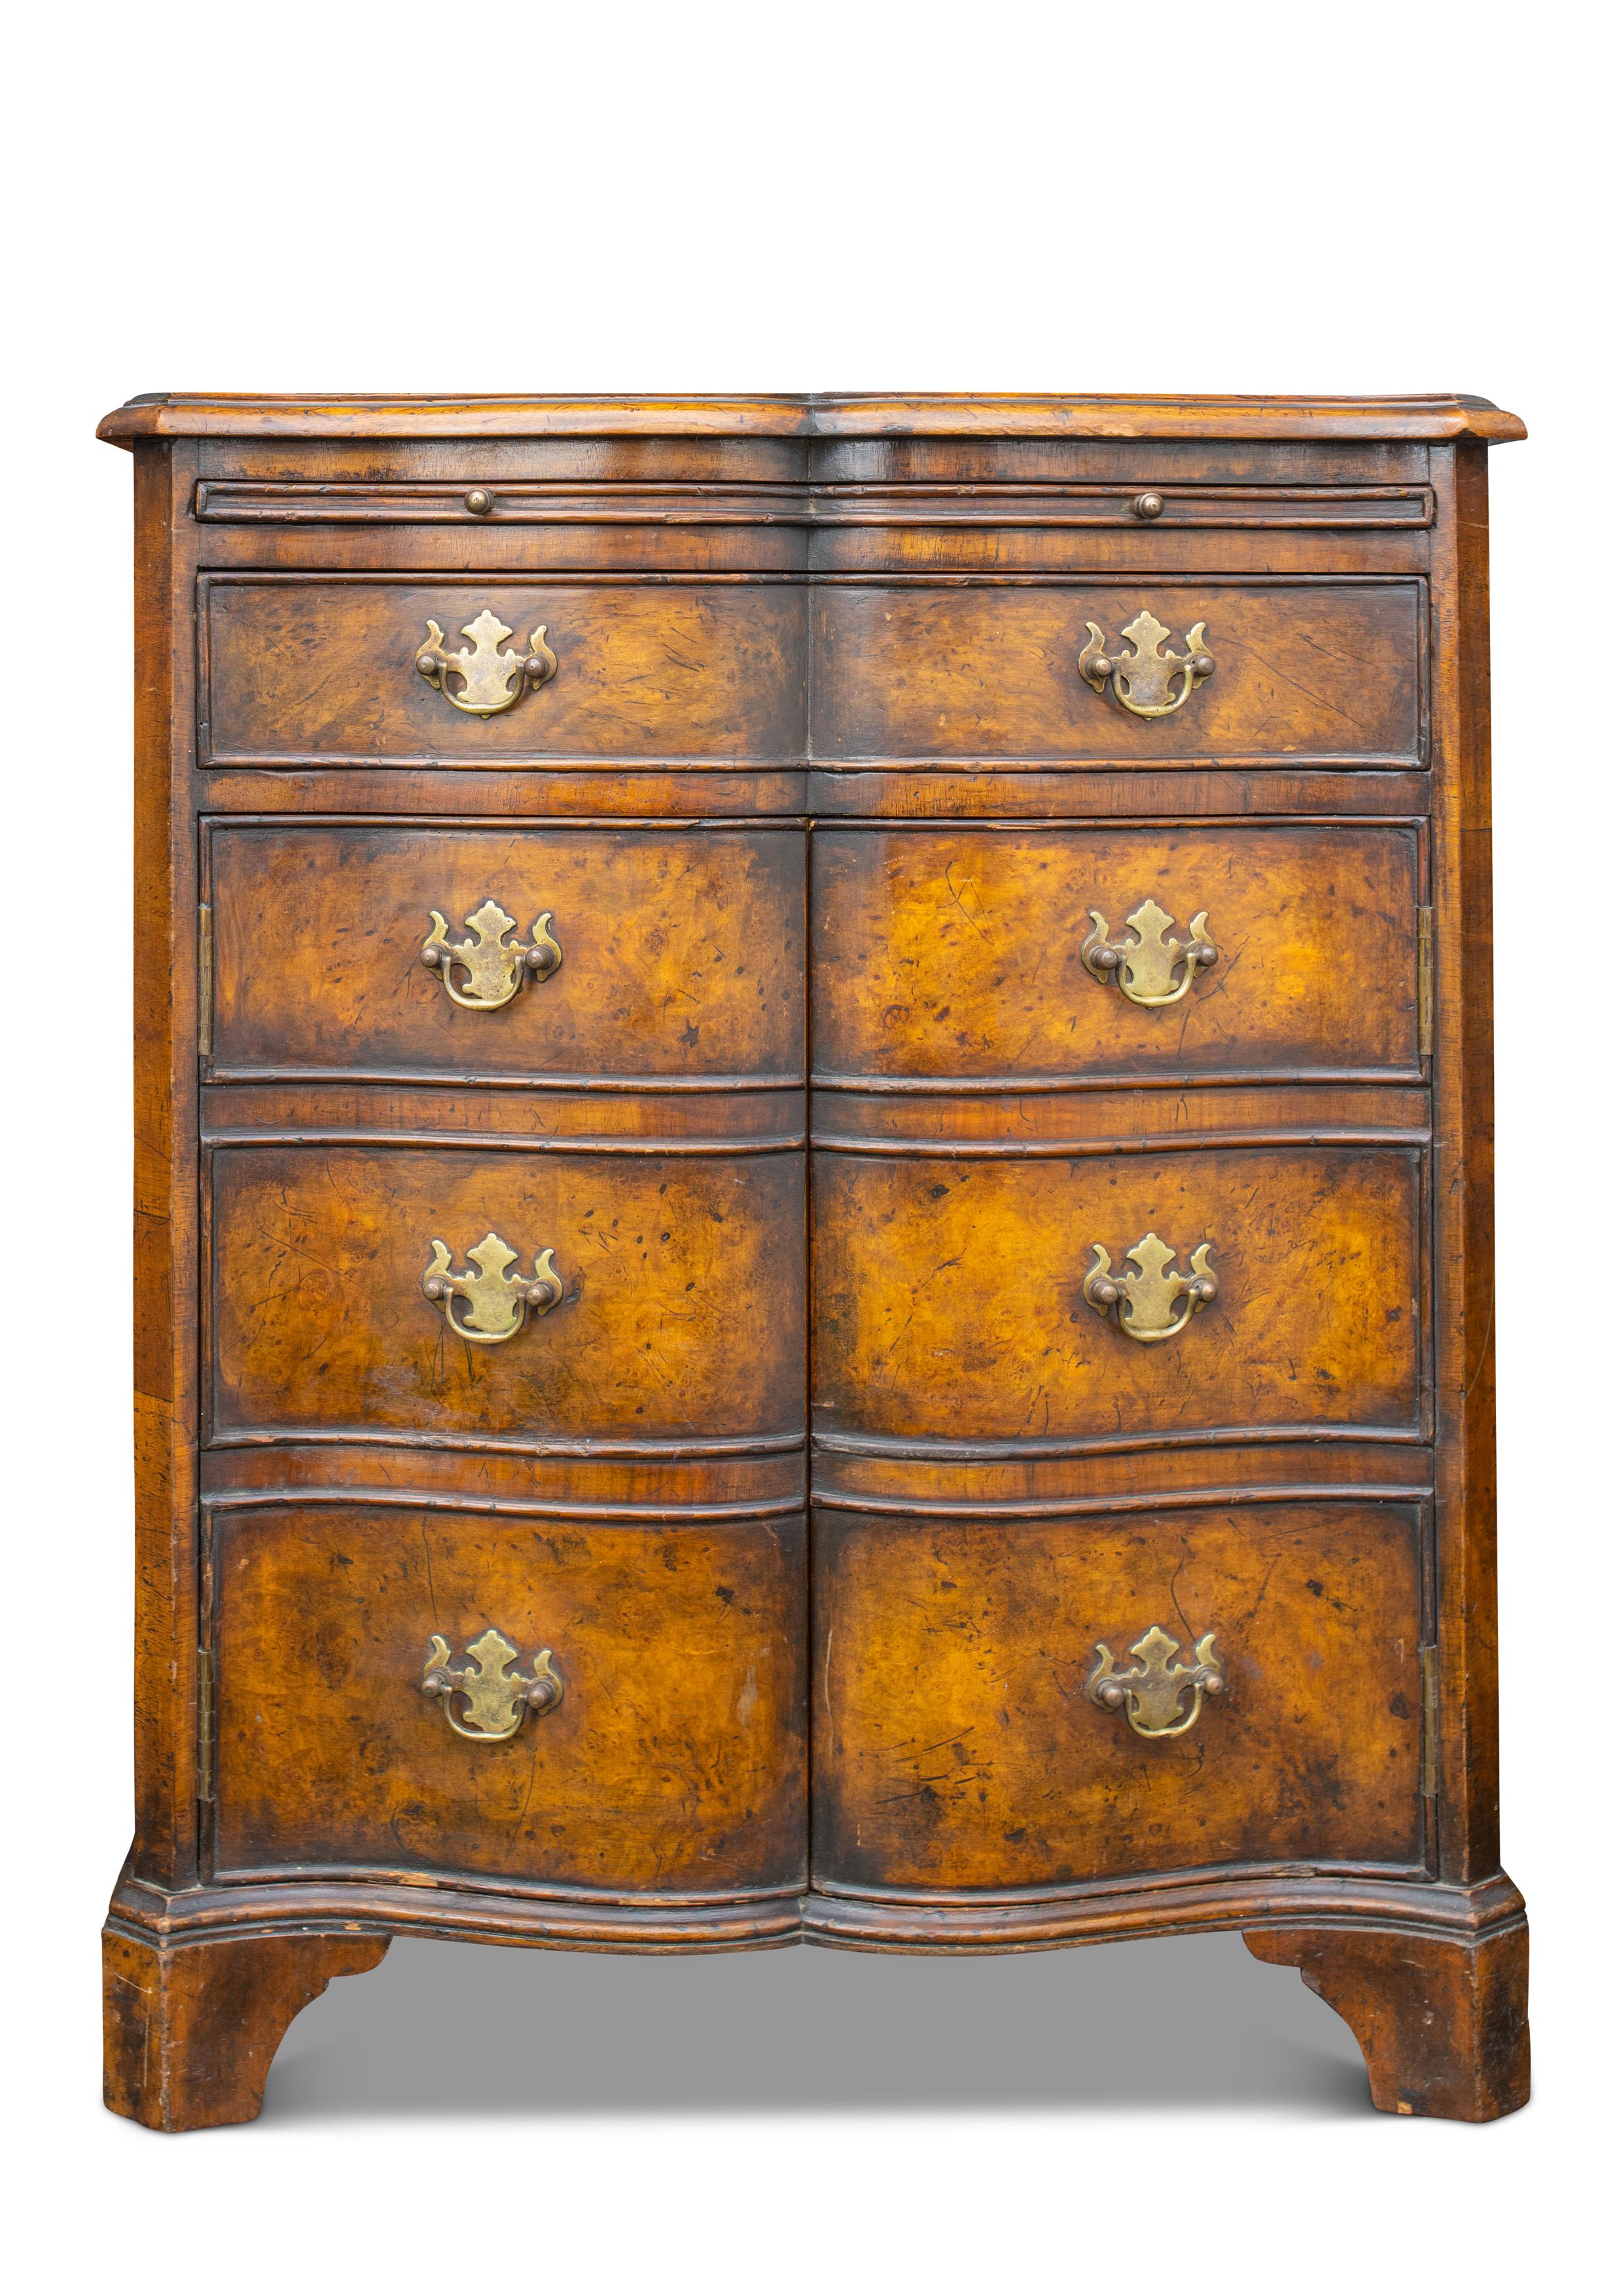 20th Century Burr Walnut Reverse Serpentine Batchelor's Cabinet With Single Drawer 1900's For Sale